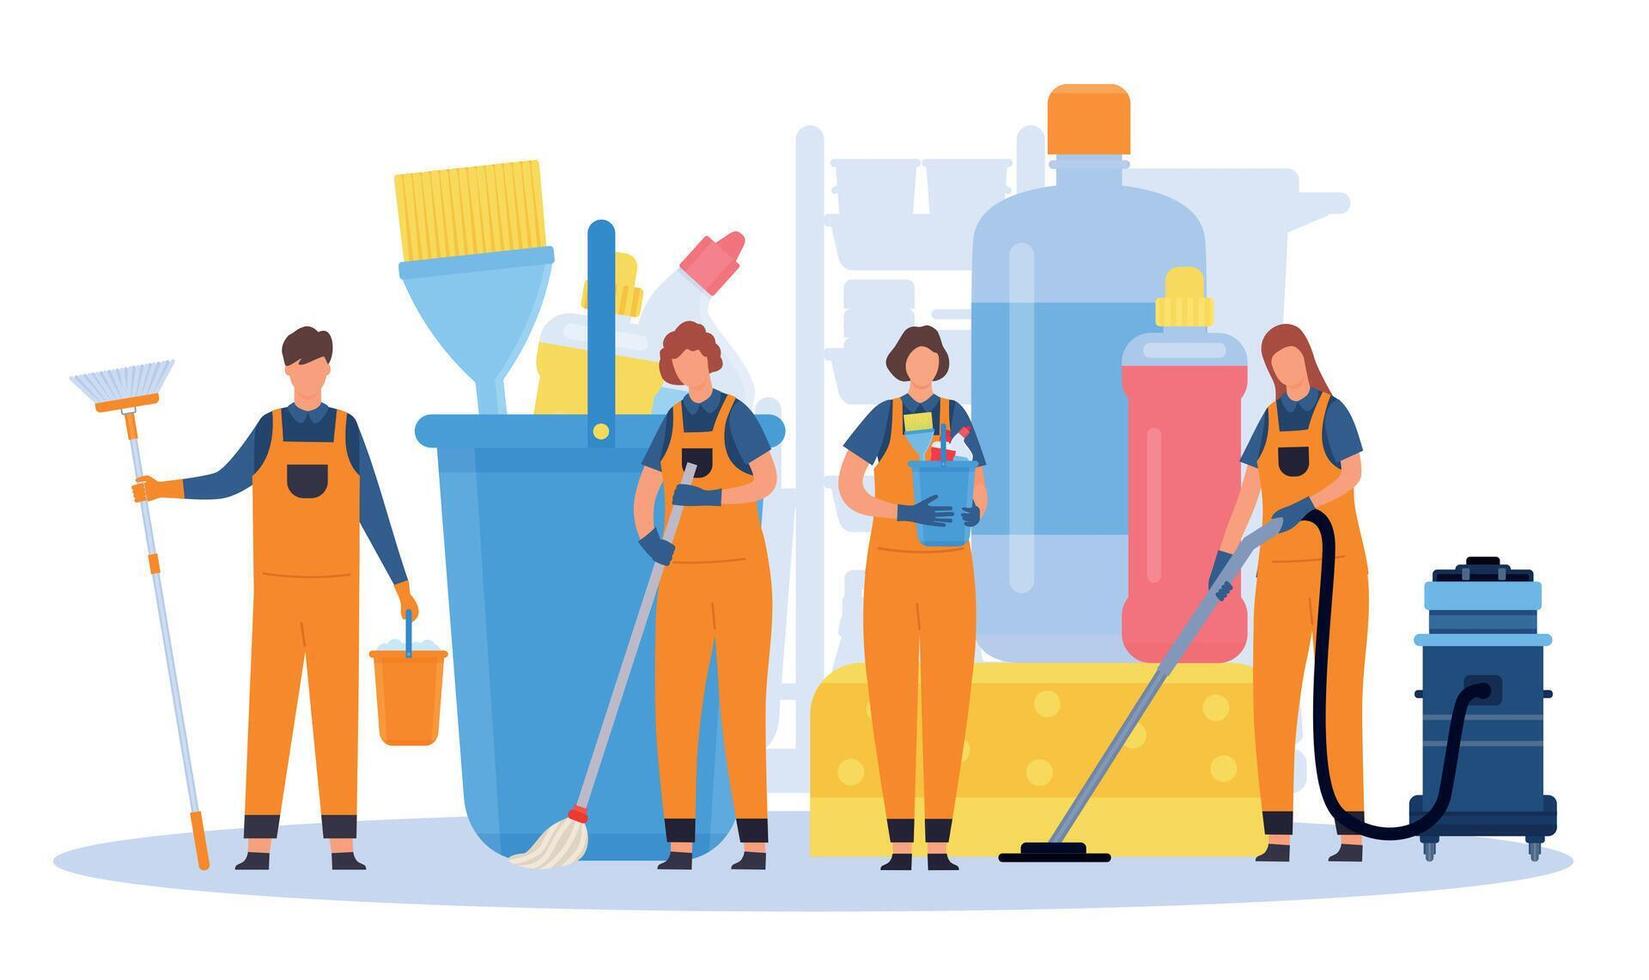 Professional cleaning service team with equipment and tools. Flat men and women cleaners in uniforms with vacuums and brooms vector concept